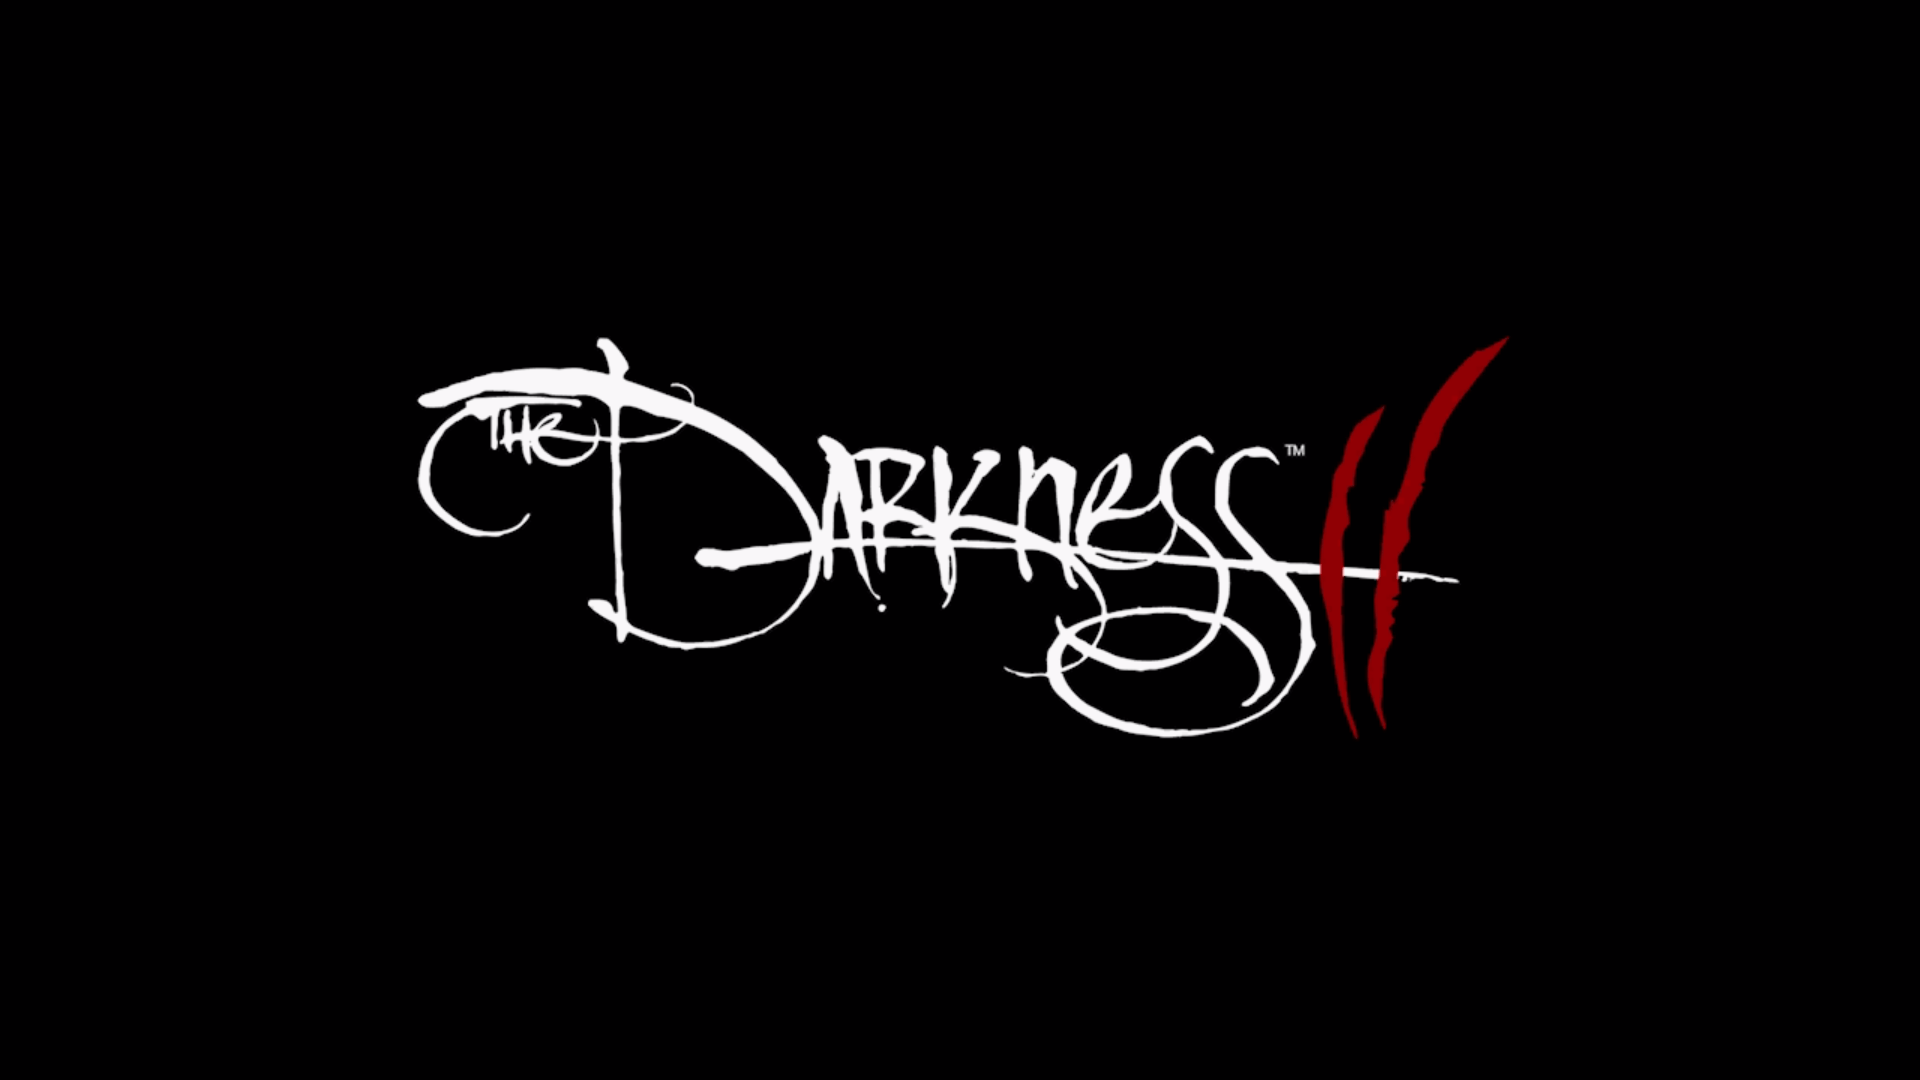 The Darkness Logo Black Yuiphone (id: 184312)